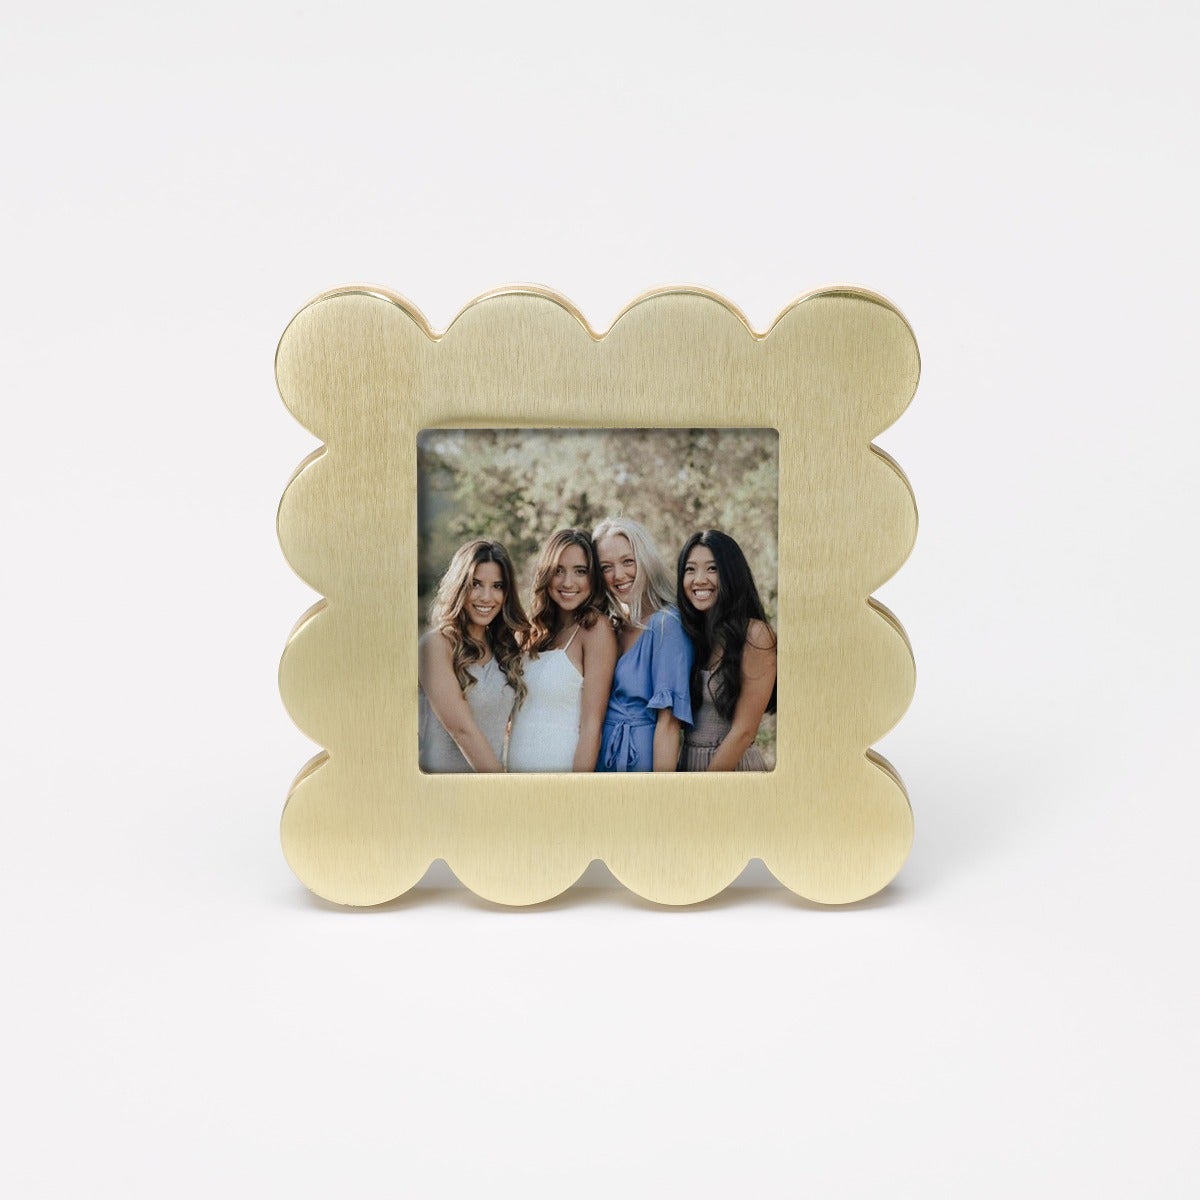 Sing a Song of Love Wedding Frame by Roman Inc. – Little Flower Gifts Online